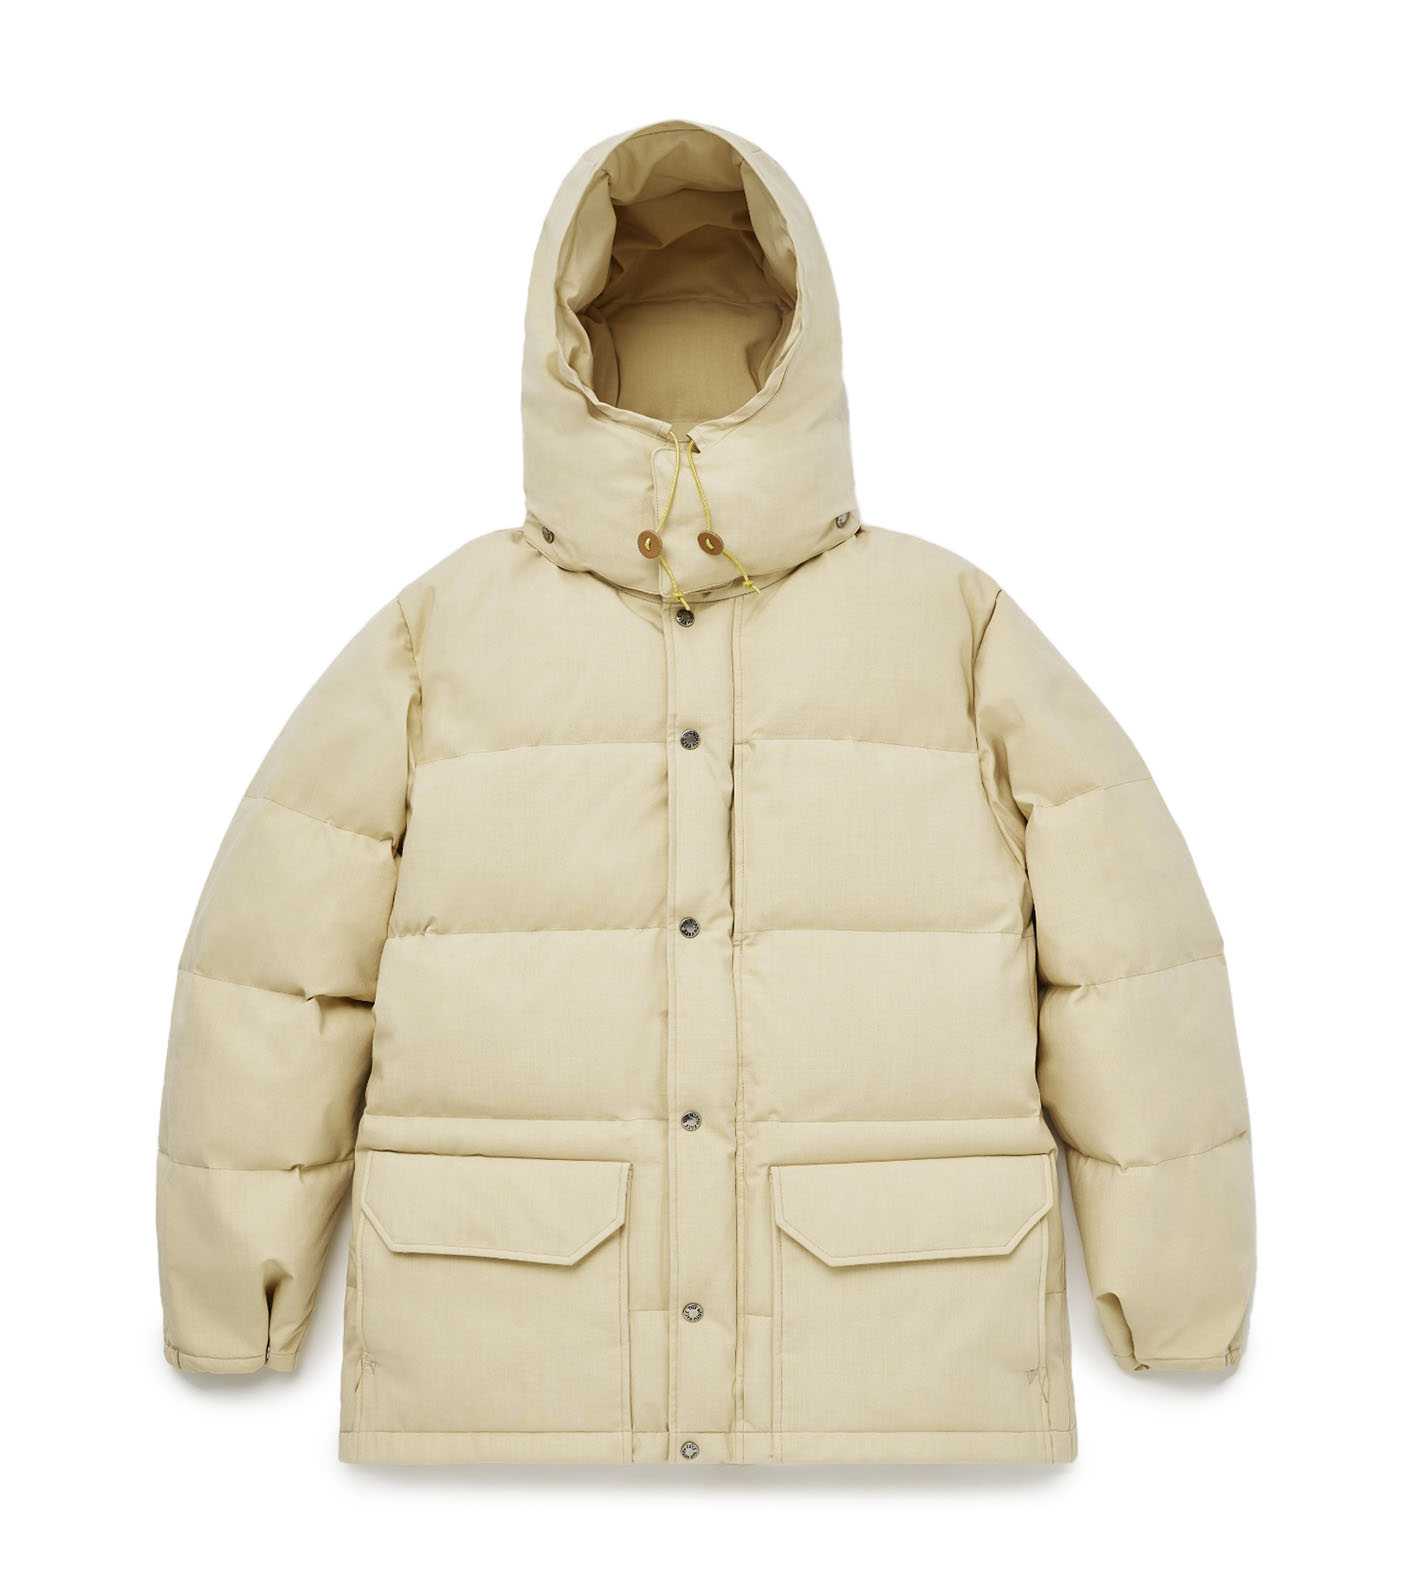 THE NORTH FACE Sierra down jacket